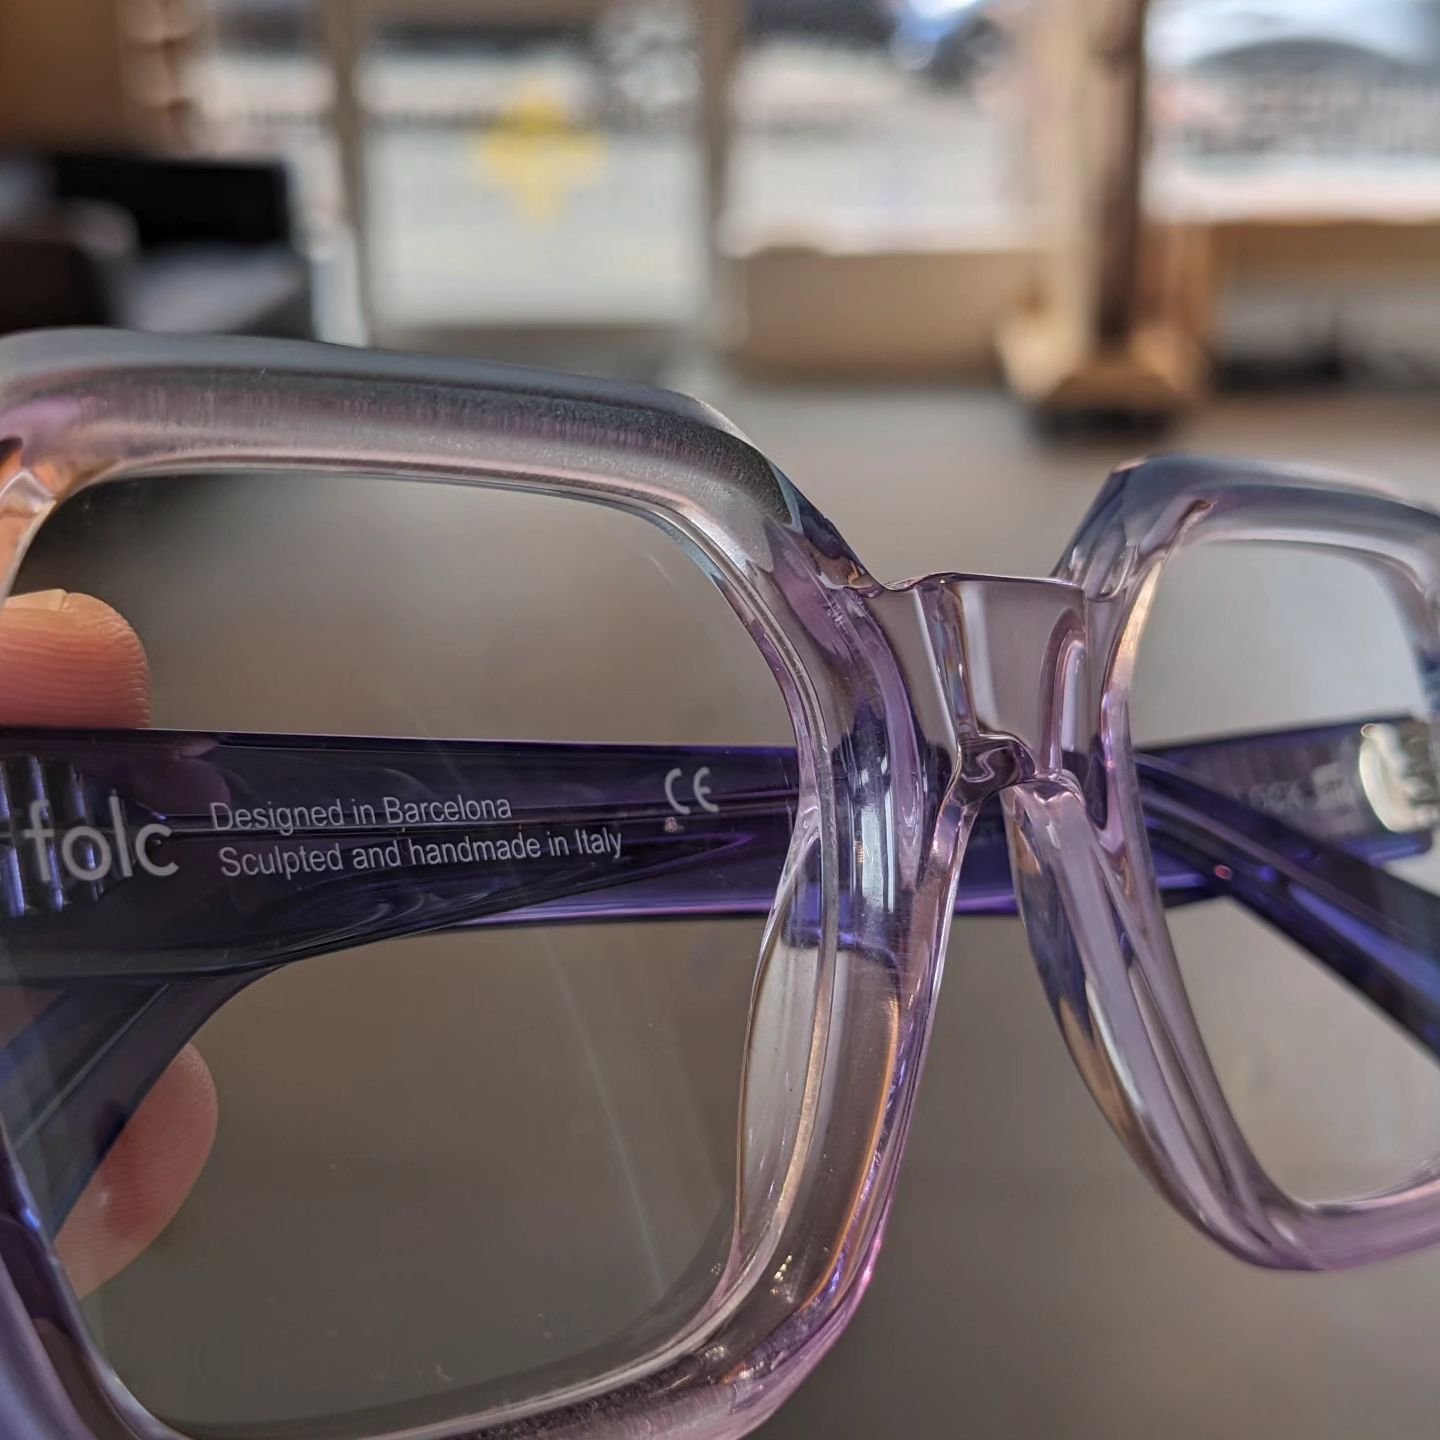 New arrivals from 🇮🇹 after being designed in 🇪🇸 loving the lilac 💜

#indiefashion 
#indiesheffield 
#eyewear 
#bobbydazzlers
#spexy
#eyeyelookgood